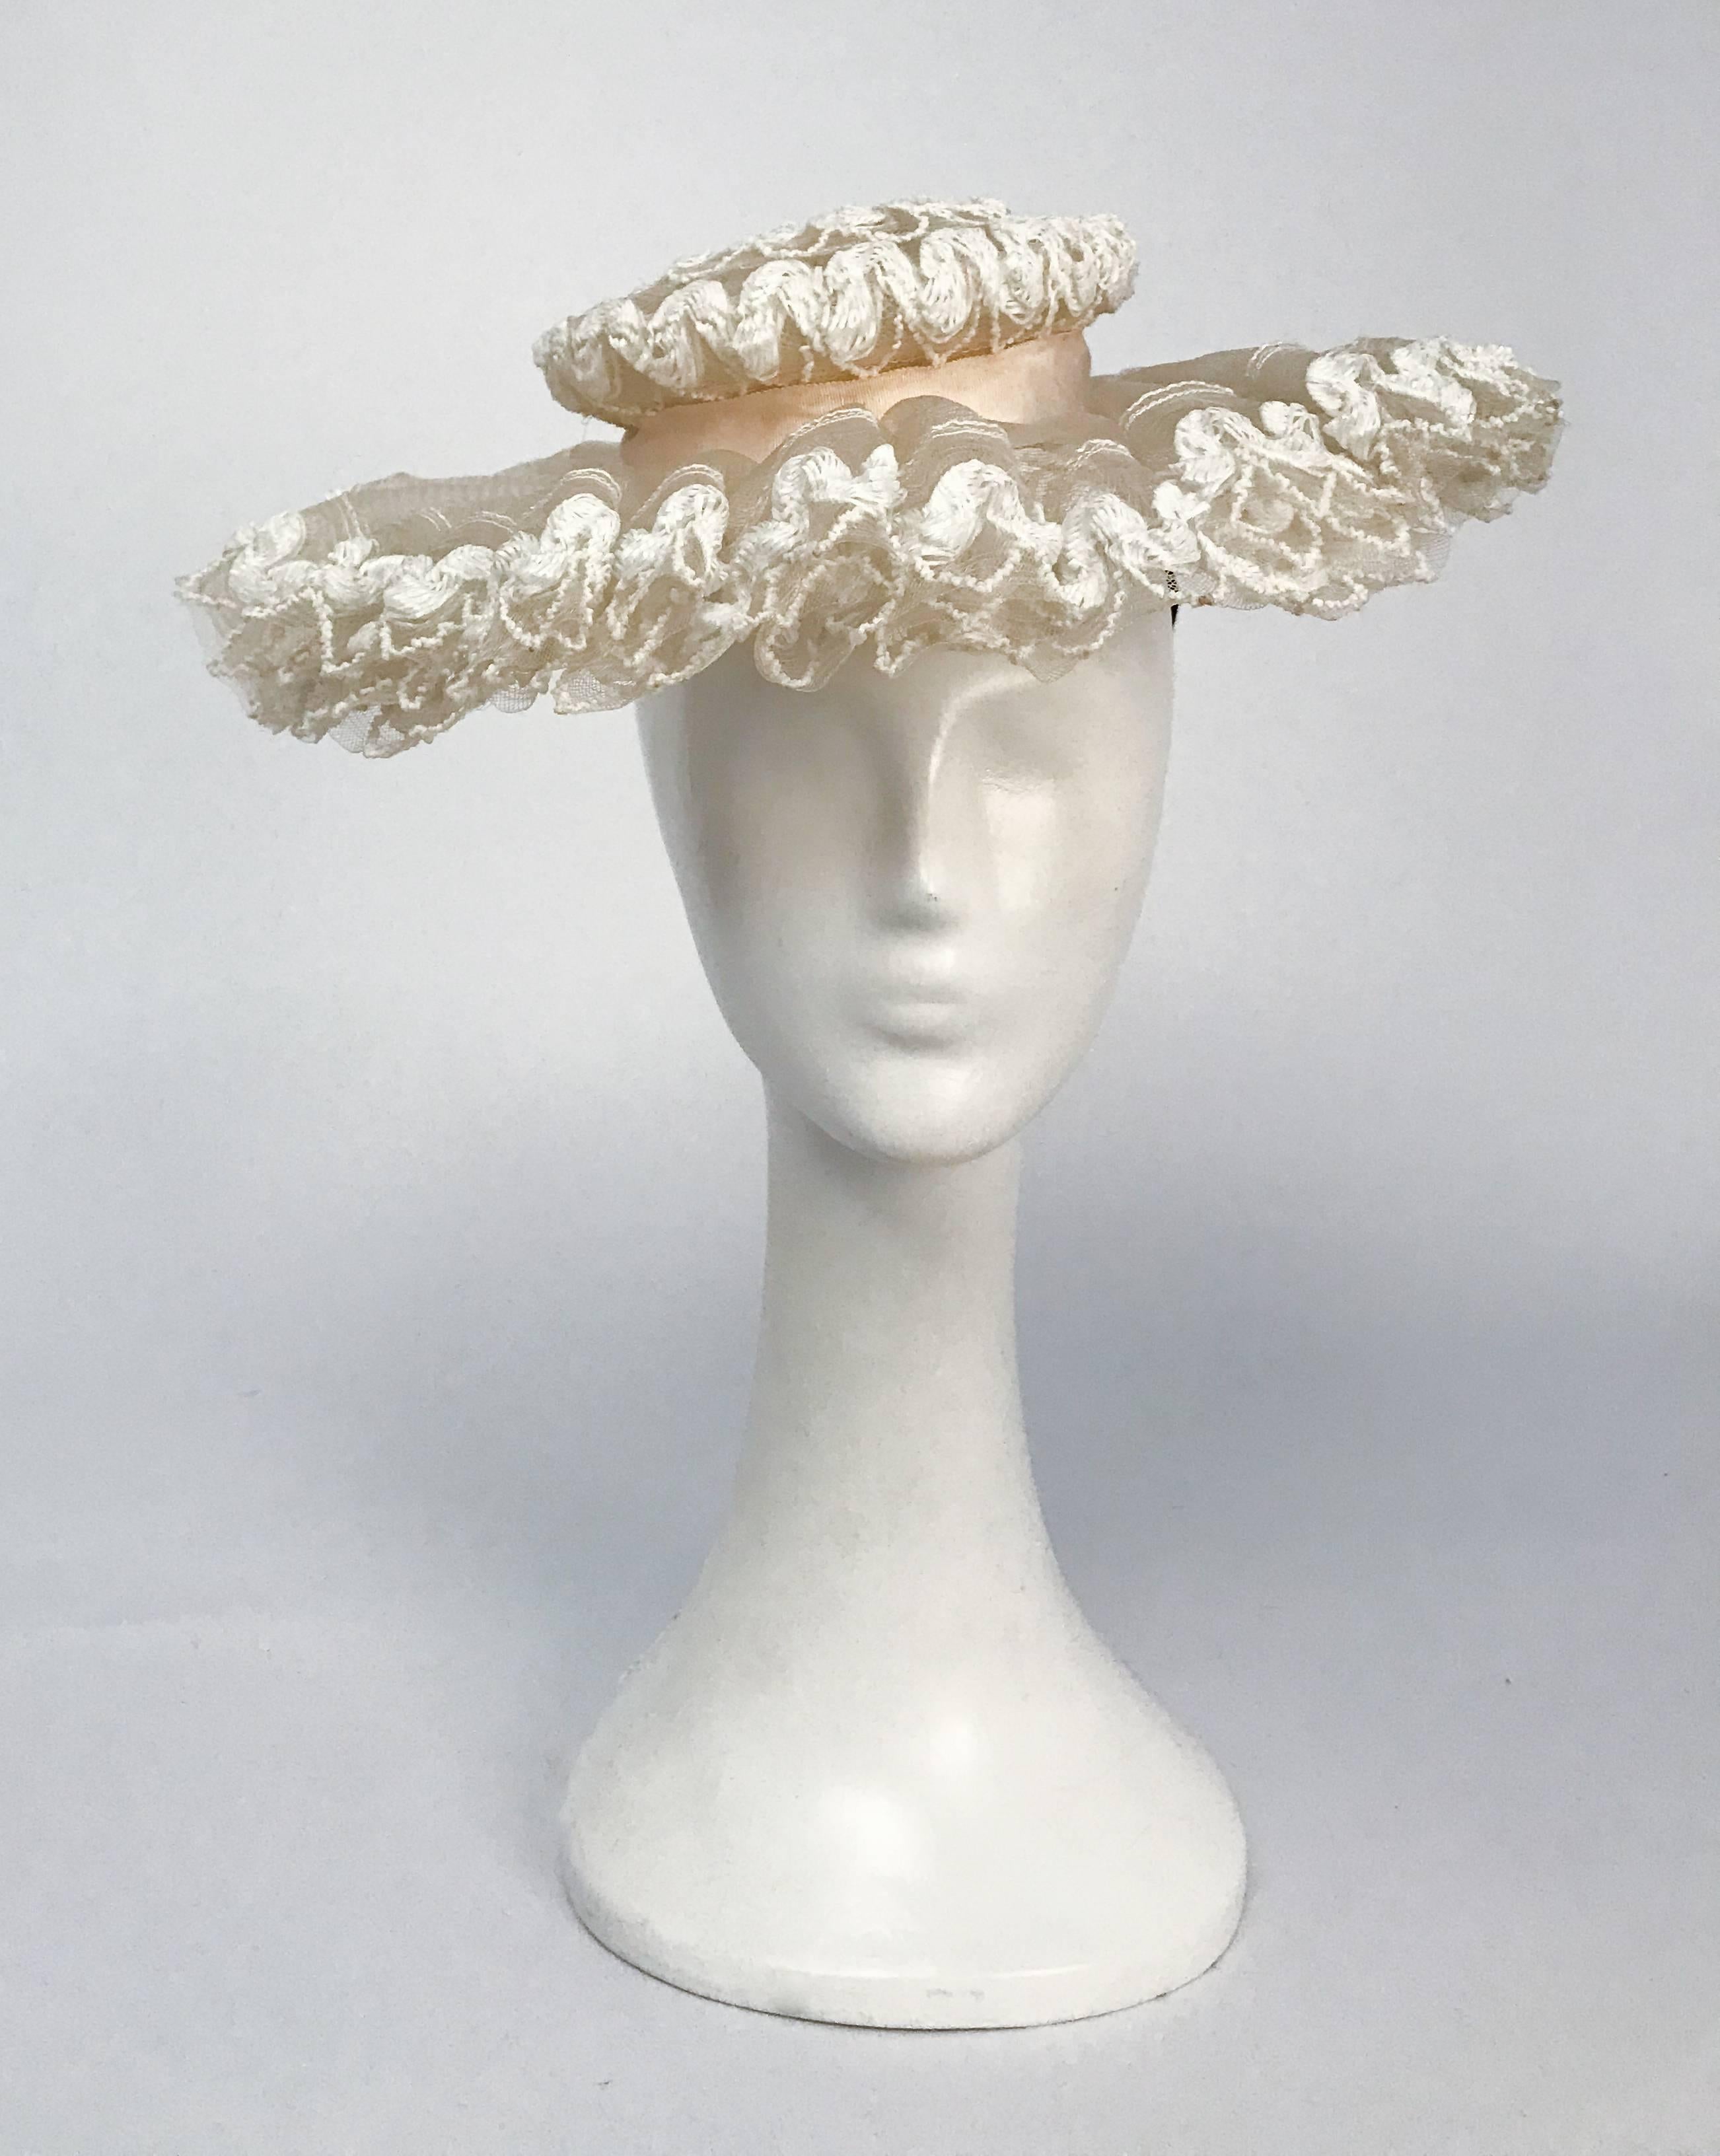 1950s White Lace & Horsehair Hat. Edwardian style hat from the 1950s made of ruffled horsehair base with lace pattern and decorated with ribbon band. Held to back of head with band at nape of neck and perches atop the head. 